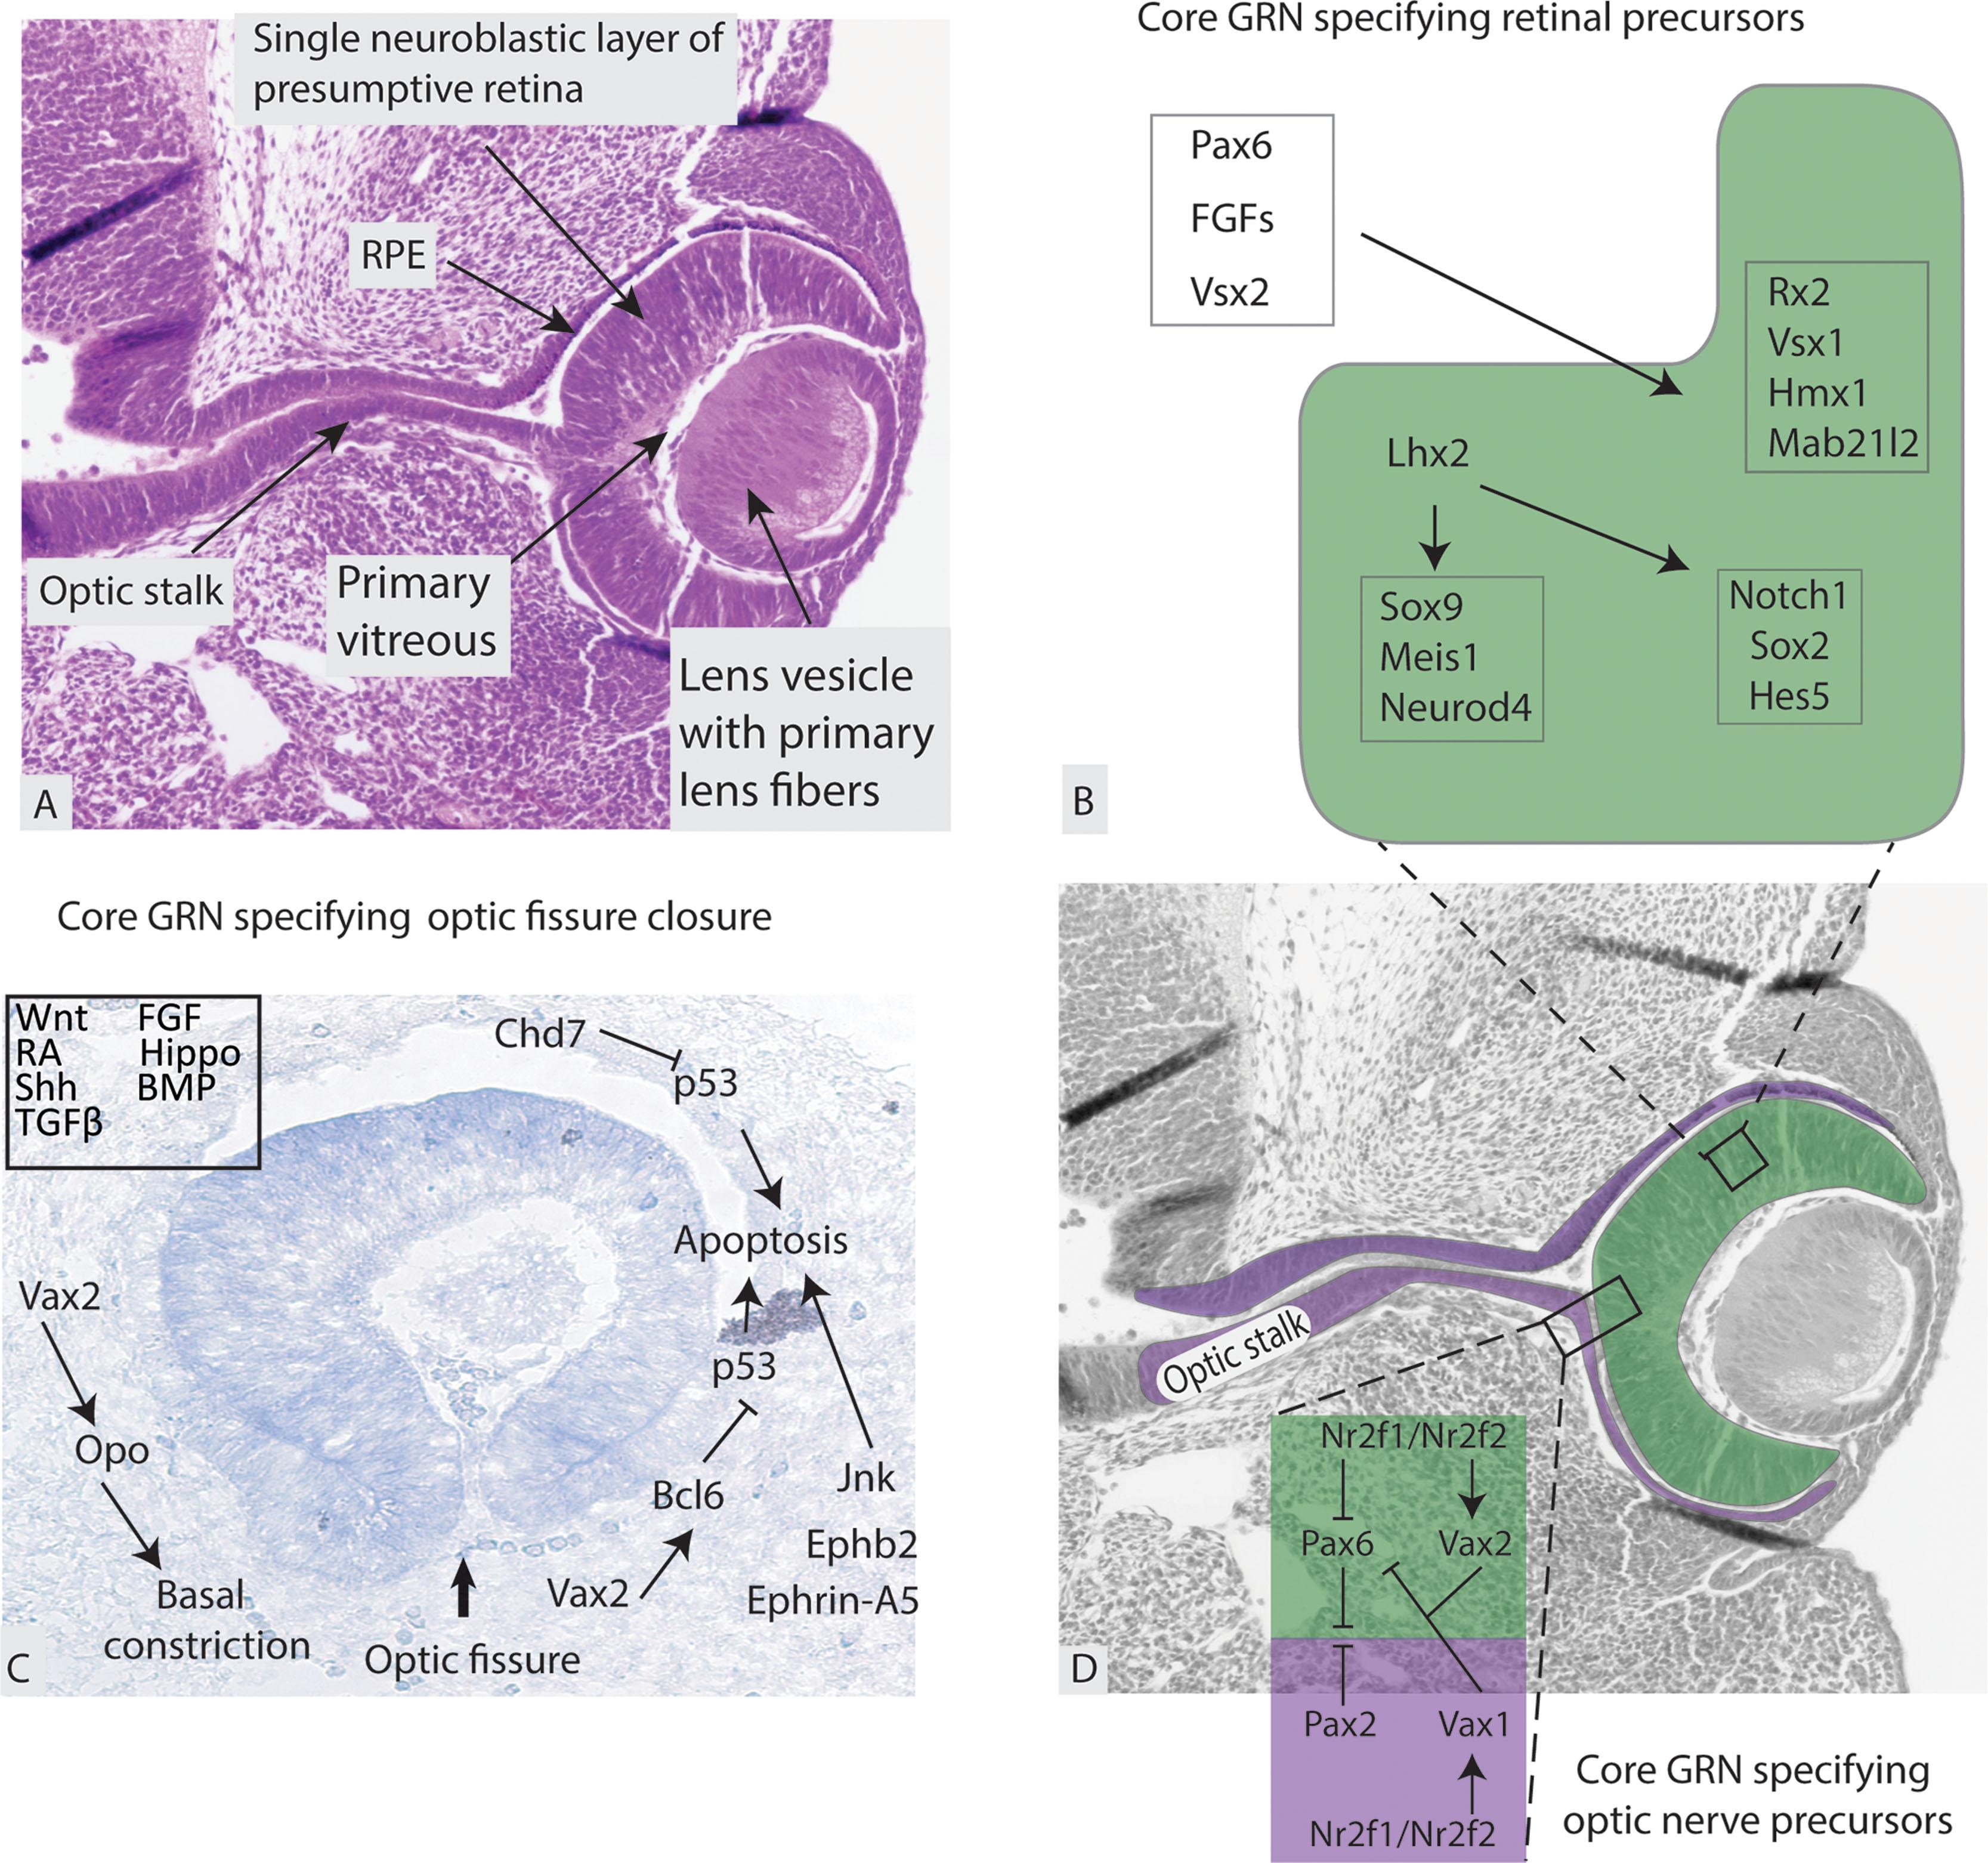 Fig. 2.3, Gene regulatory networks (GRN) in optic fissure closure, retina, retinal pigment epithelium (RPE) and lens development. (A) Optic fissure closure, lens vesicle formation, and primary vitreous (12.5 days gestation (DG) mouse≈44 DG human) with overlay of core gene networks (GRNs) during optic cup patterning and early retinal differentiation. The outer layer of the optic cup gives rise to the RPE, while the inner layer gives rise to the neural retina. (B) Core GRNs specifying the distinct retinal progenitors. (C) Parasaggital section of mouse eye just prior to fissure closure with overlay of key transcription factors including those regulating apoptosis in optic fissure closure (opo, vertebrate-specific transmembrane protein). (D) Core GRN specifying optic nerve precursors highlighting the key transcription factors that interact between presumptive neural retina and RPE during the transition of the optic stalk to the optic nerve. Green = neural retina; purple = RPE and optic stalk.